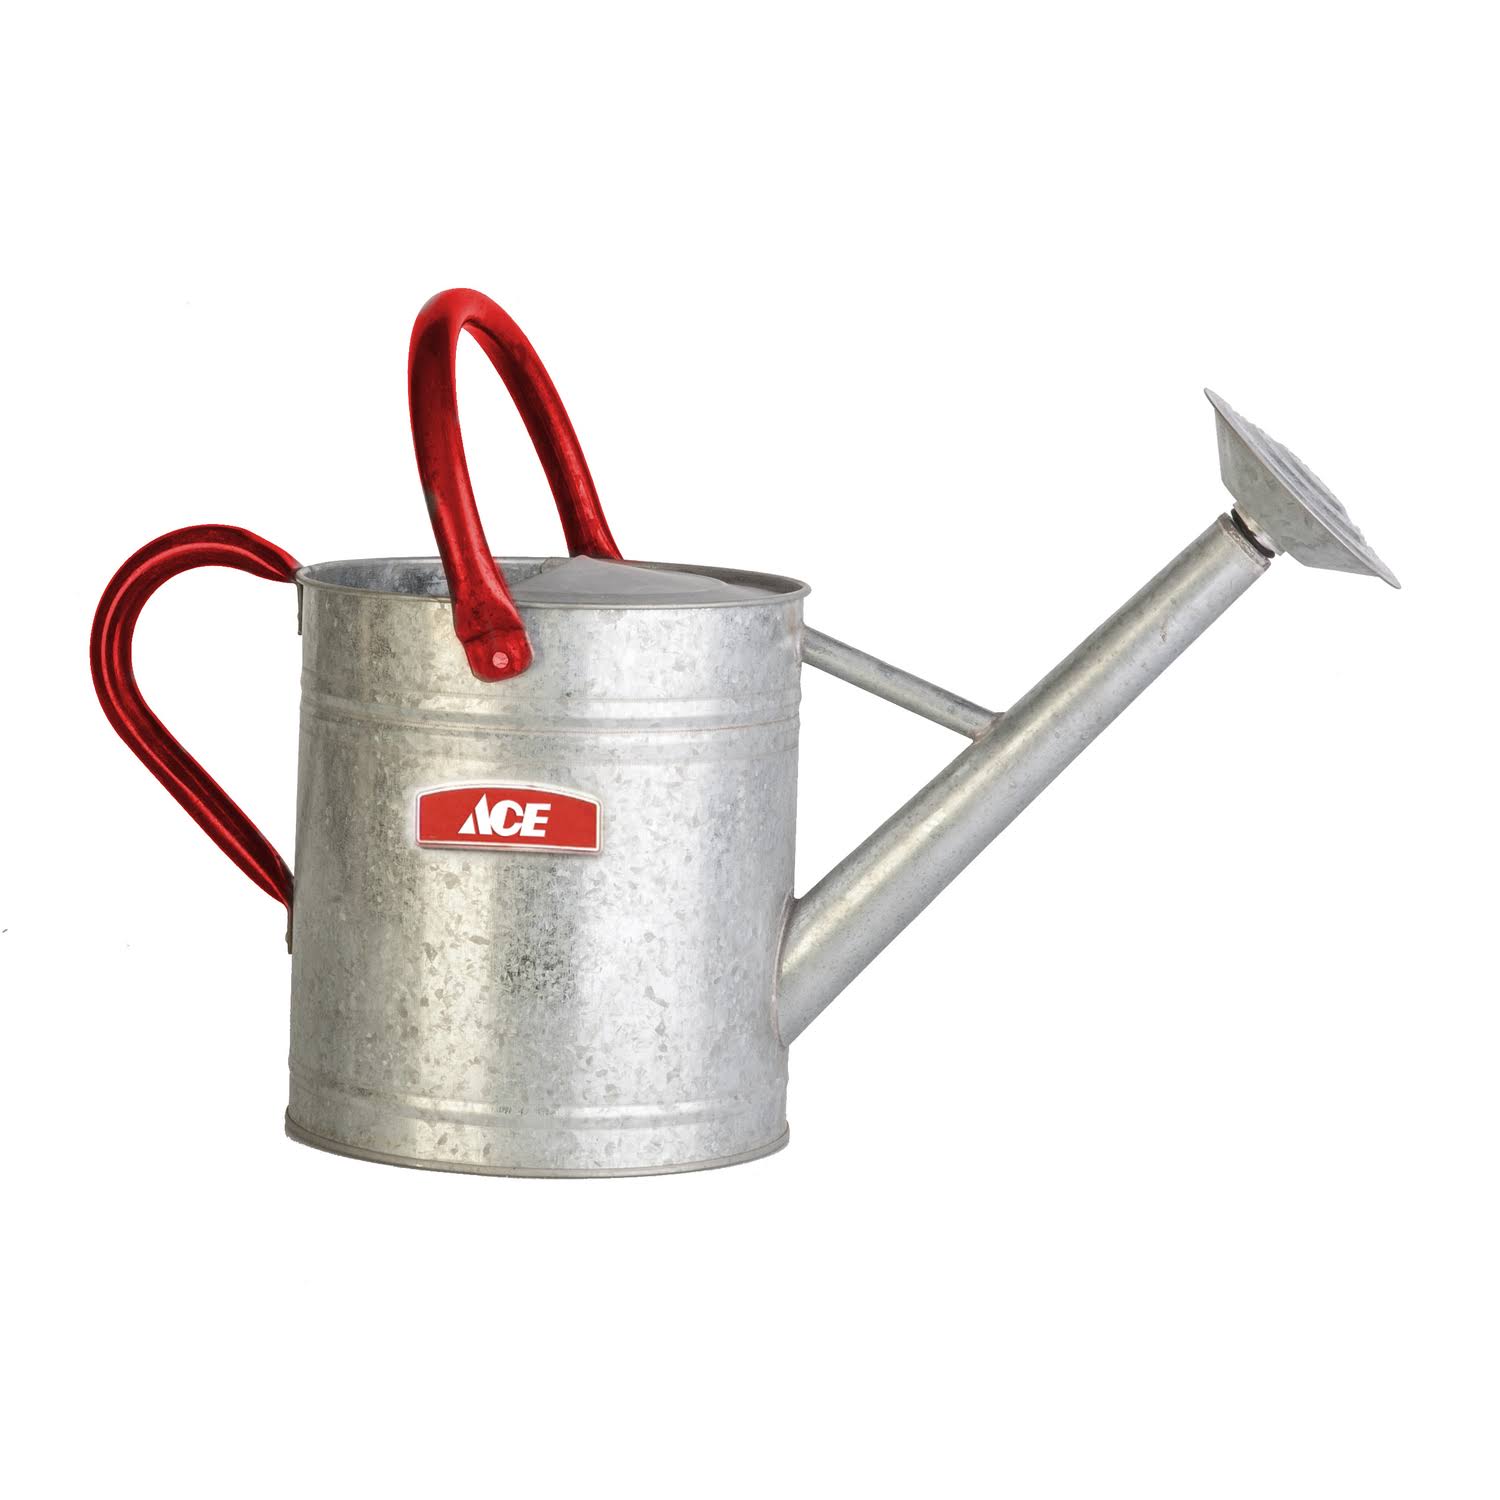 Ace Steel Watering Can - Gray